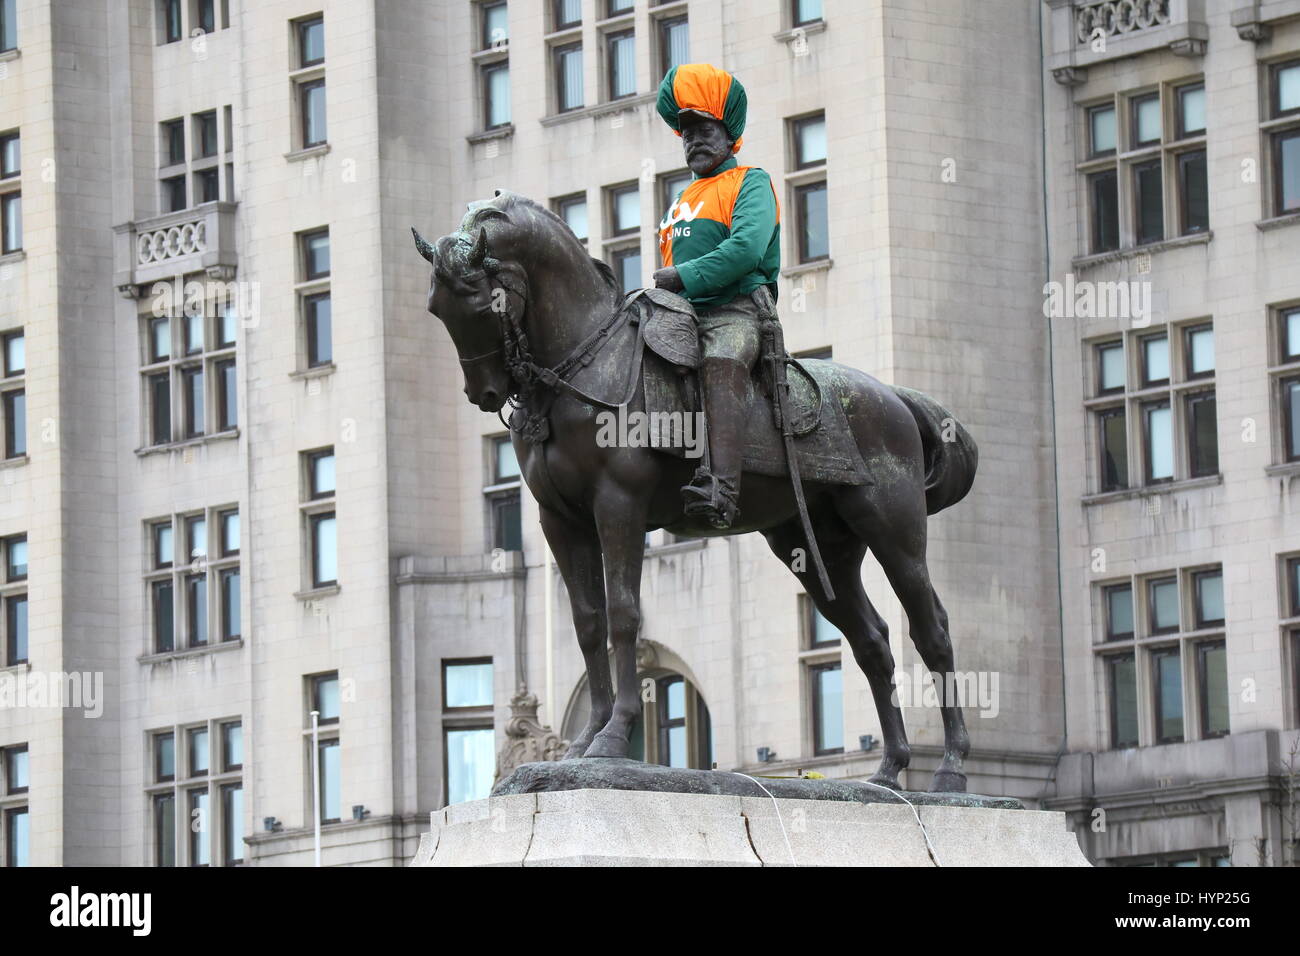 Liverpool, UK. 6th Apr, 2017. King Edward VII monument at pier head Liverpool decked out in jockey racing colours by ITV racing in preparation for the Grand National at Aintree, Pier Head, Liverpool, 6th April 2017. Credit: Radharc Images/Alamy Live News Stock Photo